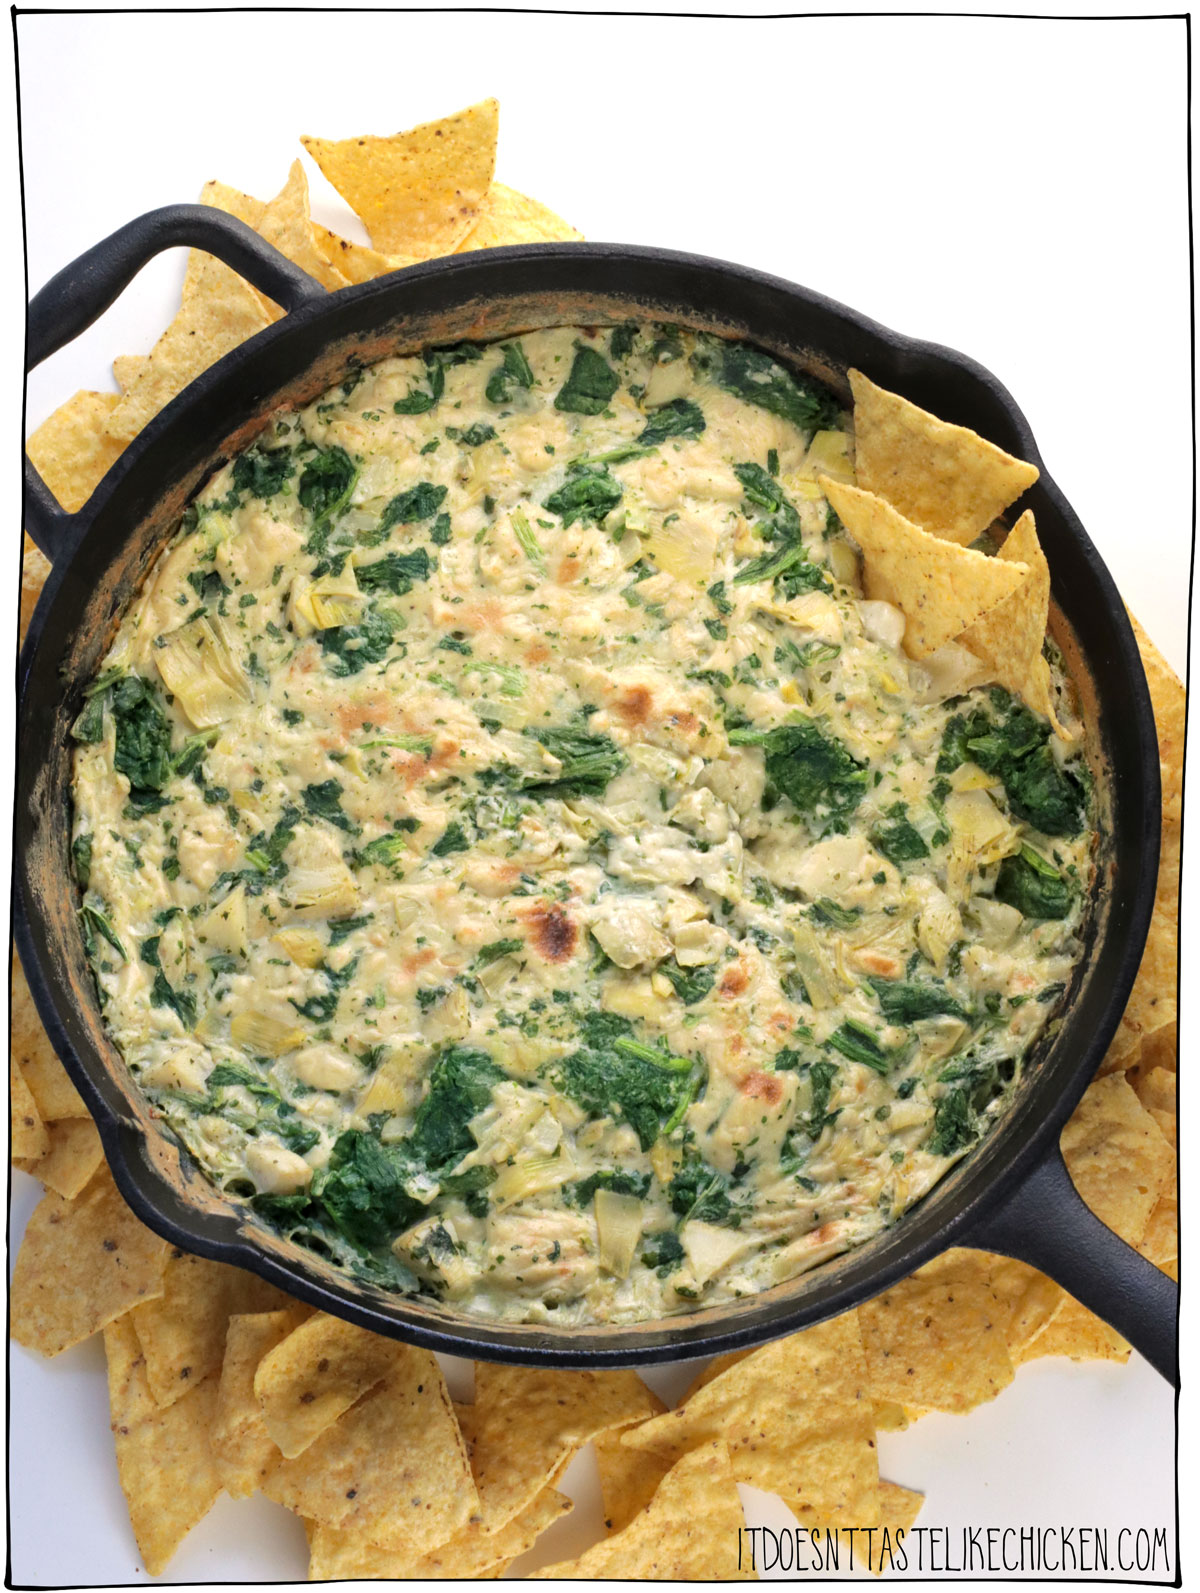 This Vegan Spinach Artichoke Dip is a fan-favorite recipe! Cheesy, gooey, creamy, and absolutely delicious. The perfect appetizer for game day, a BBQ, movie night, or anytime you want to impress. No one will know it's vegan!